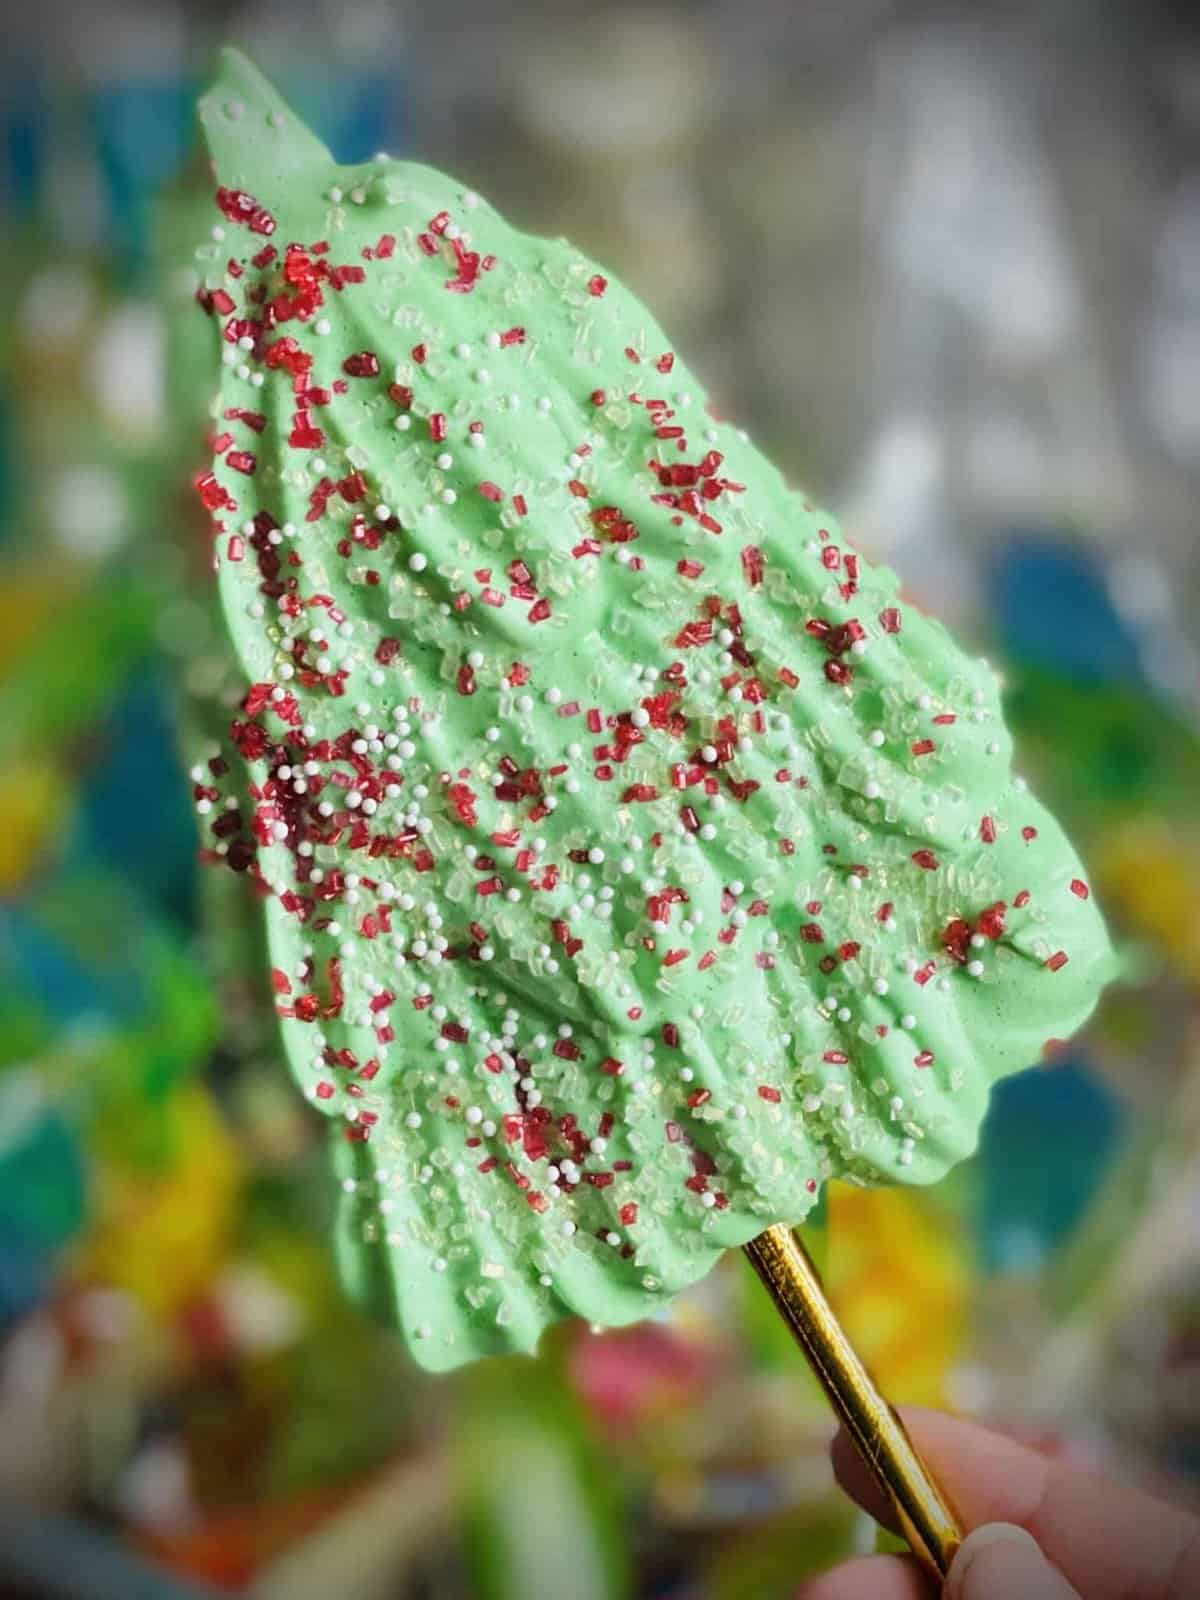 Vegan meringue cookies. It is a green Christmas tree on a gold stick. The tree is covered in red and white sprinkles.